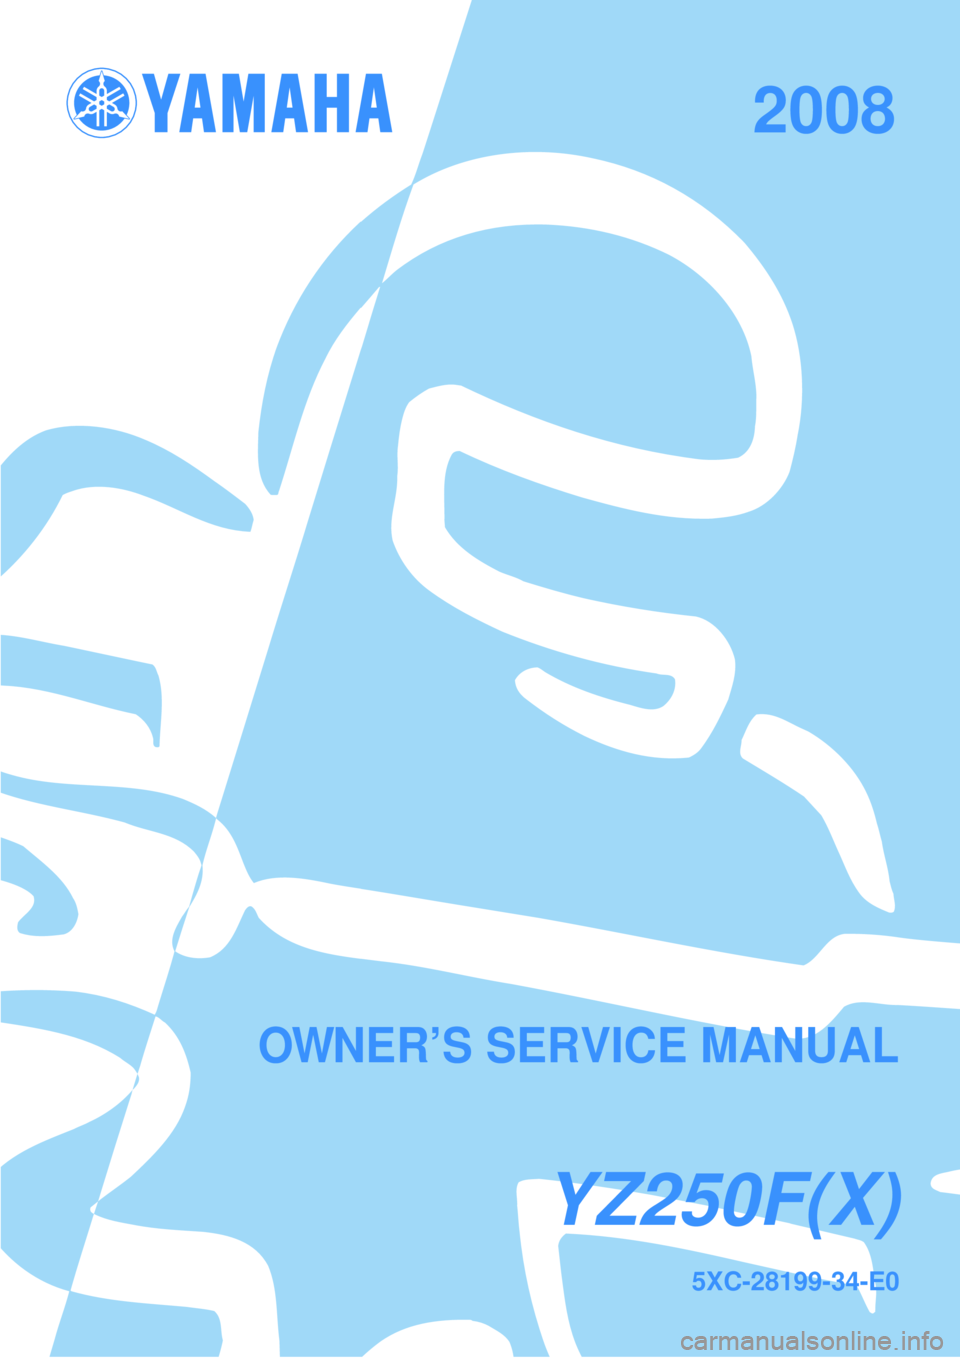 YAMAHA YZ250F 2008  Owners Manual YZ250F(X)
5XC-28199-34-E0
2008
OWNER’S SERVICE MANUAL 